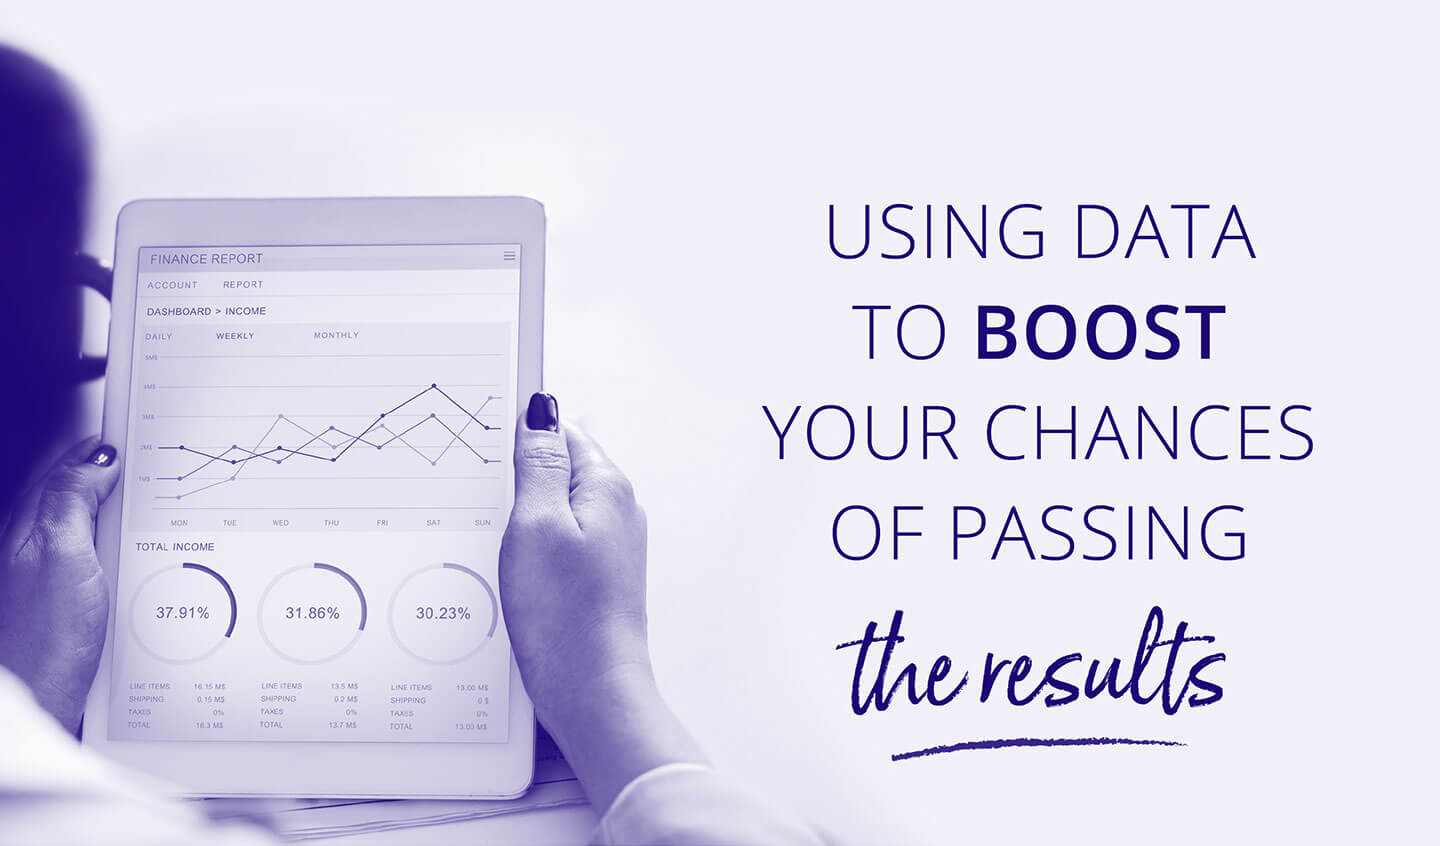 Using data to boost your chances of passing: The results.